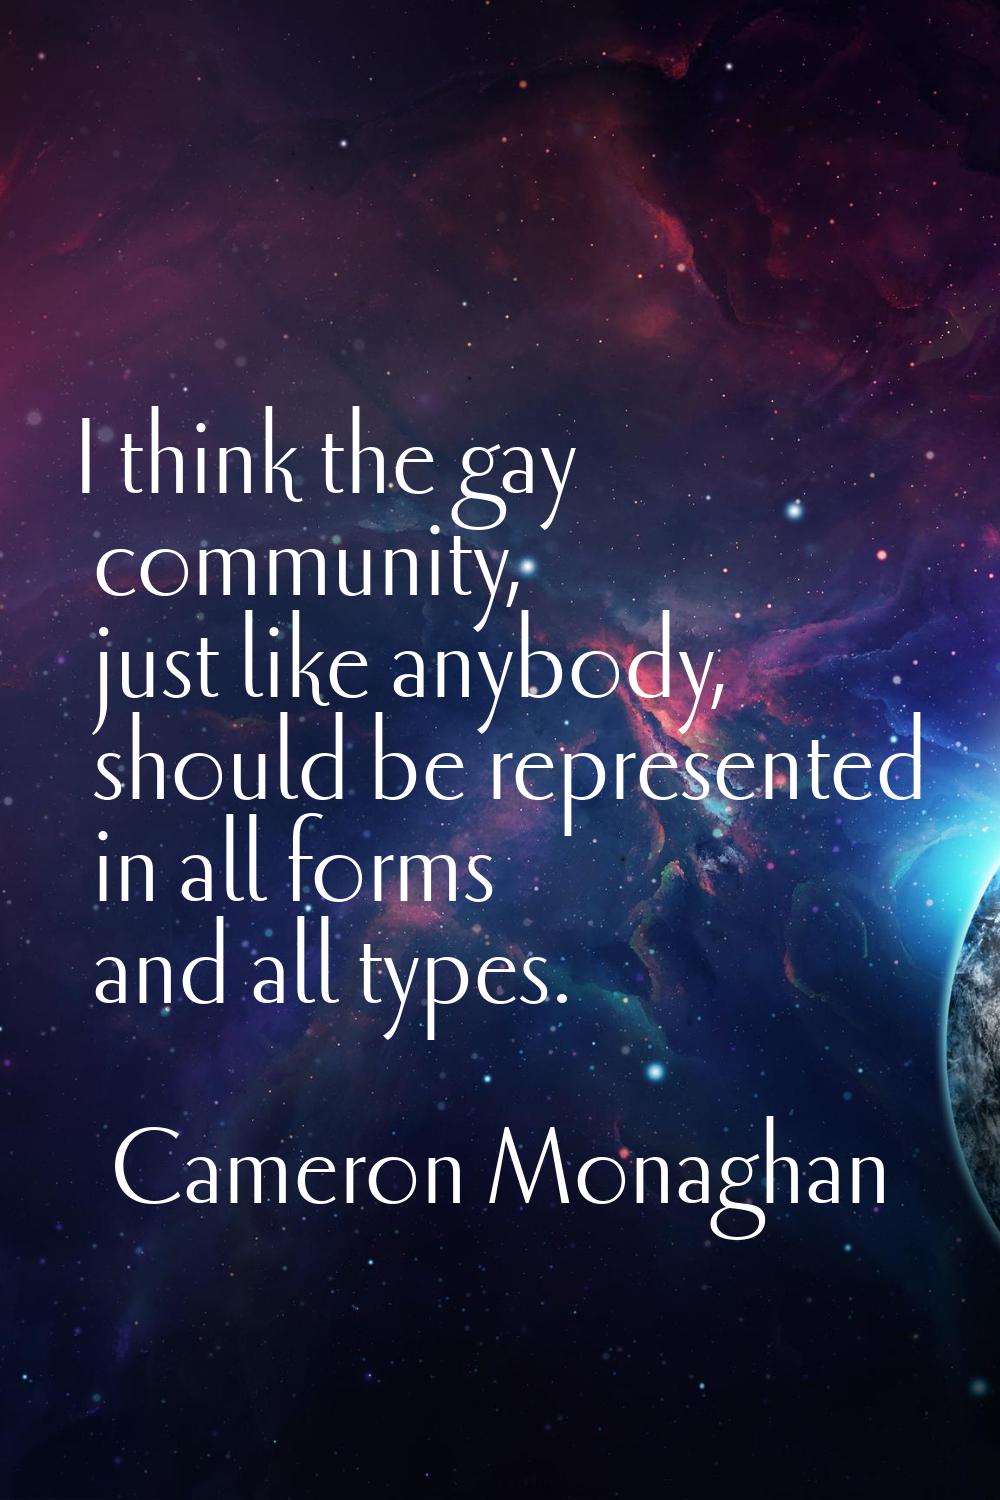 I think the gay community, just like anybody, should be represented in all forms and all types.